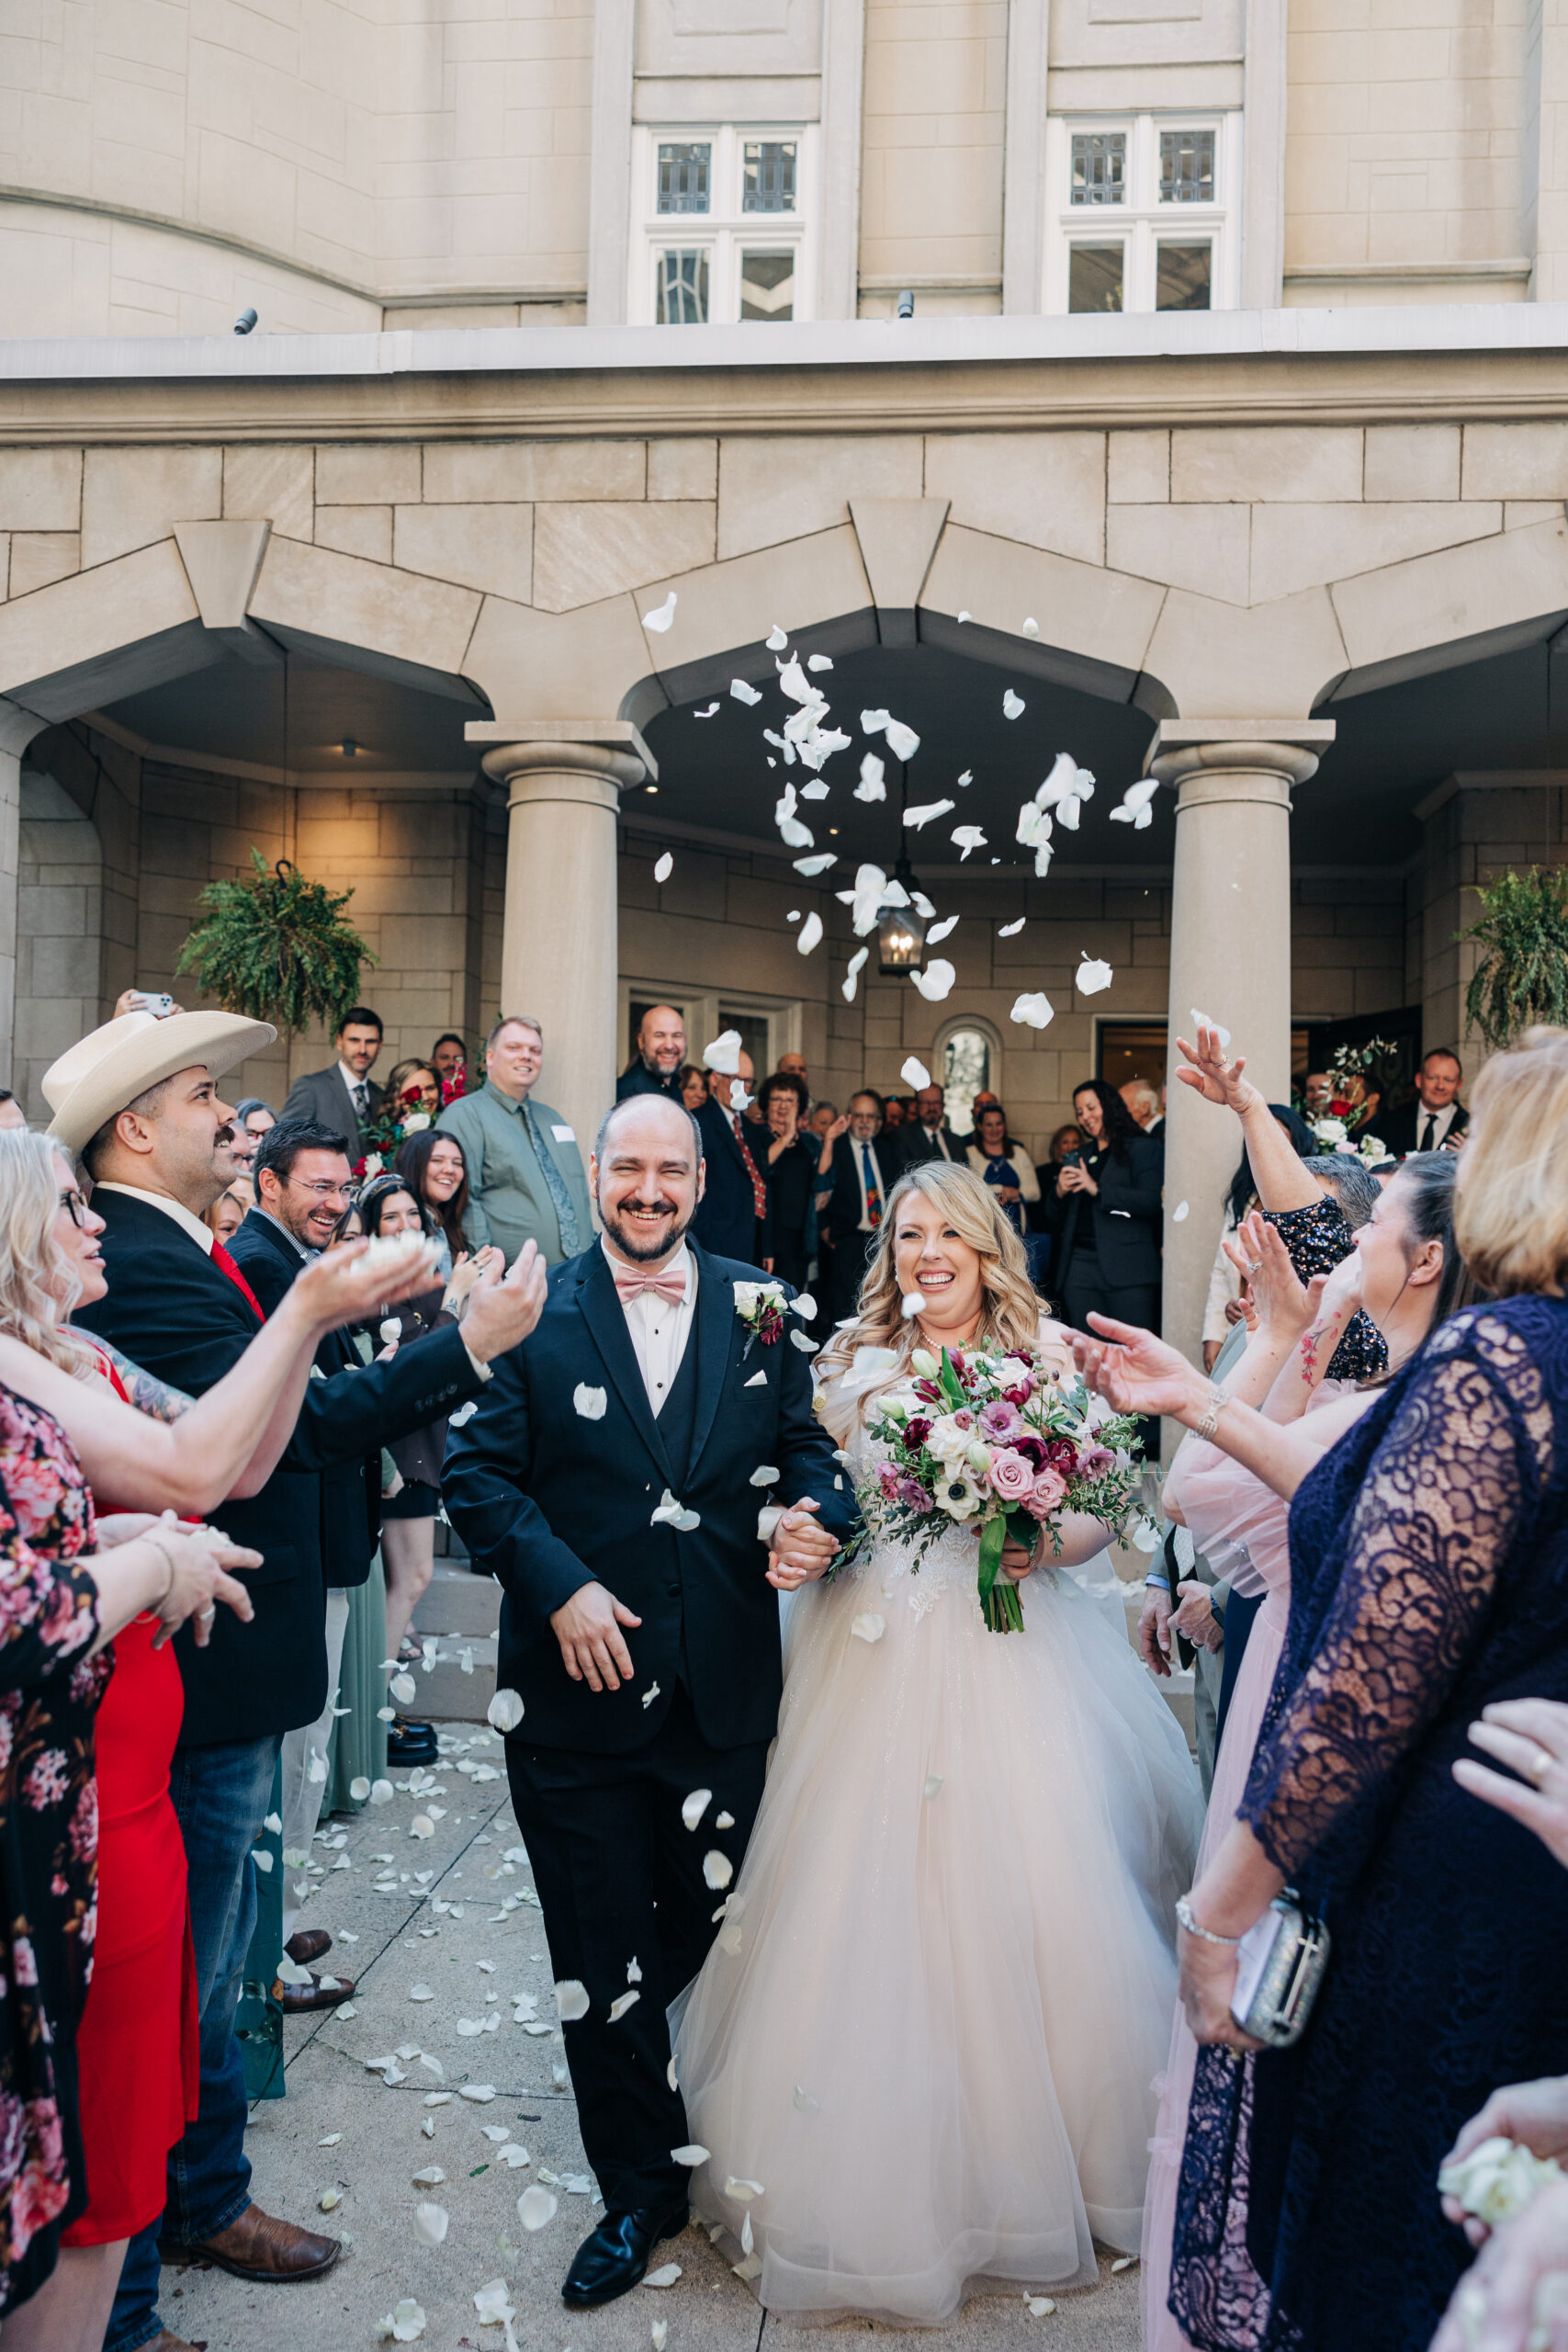 Newlyweds exit their wedding under a shower of white rose petals thrown by their guests